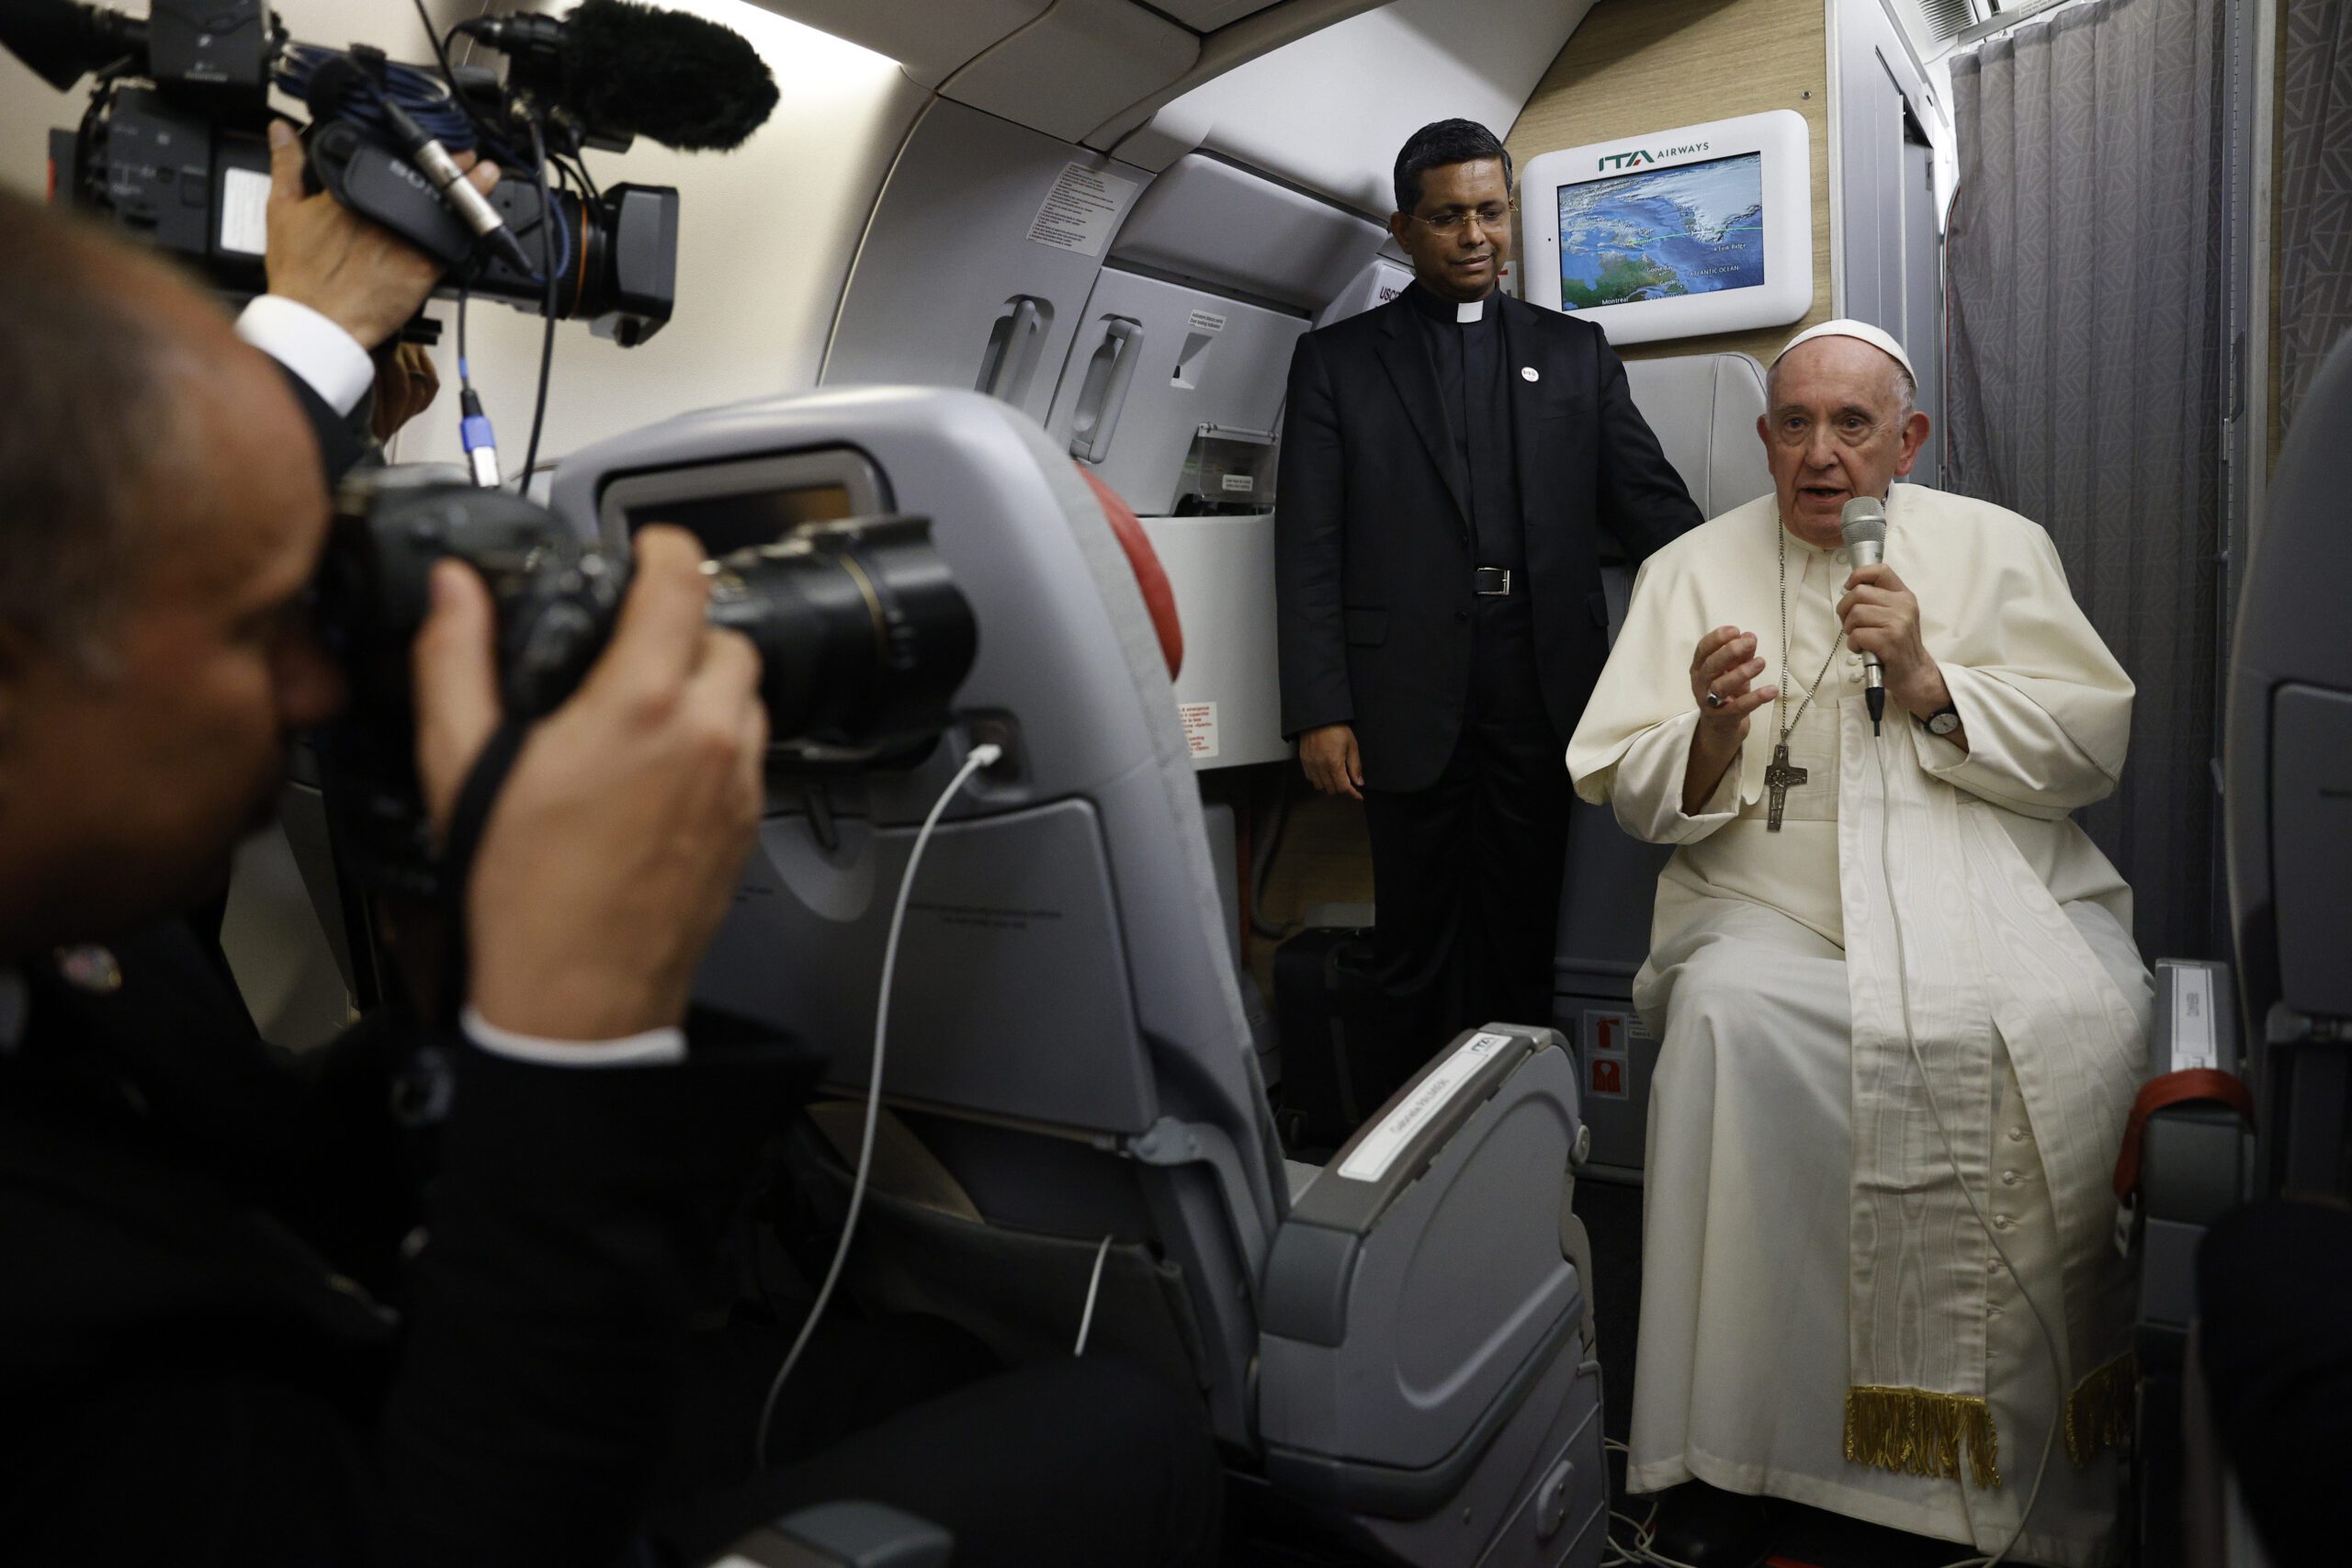 Pope Francis speaks to journalists aboard the papal flight back from Canada, July 30, 2022, where he paid a six-day pastoral visit. Francis wrapped up his Canadian pilgrimage by meeting with Indigenous delegations and visiting Inuit territory in northern Nunavut. In one of his addresses, he assailed the Catholic missionaries who "supported oppressive and unjust policies" against Native peoples in the country's notorious residential schools and vowed to pursue truth and healing. (Guglielmo Mangiapane/ Pool via AP)